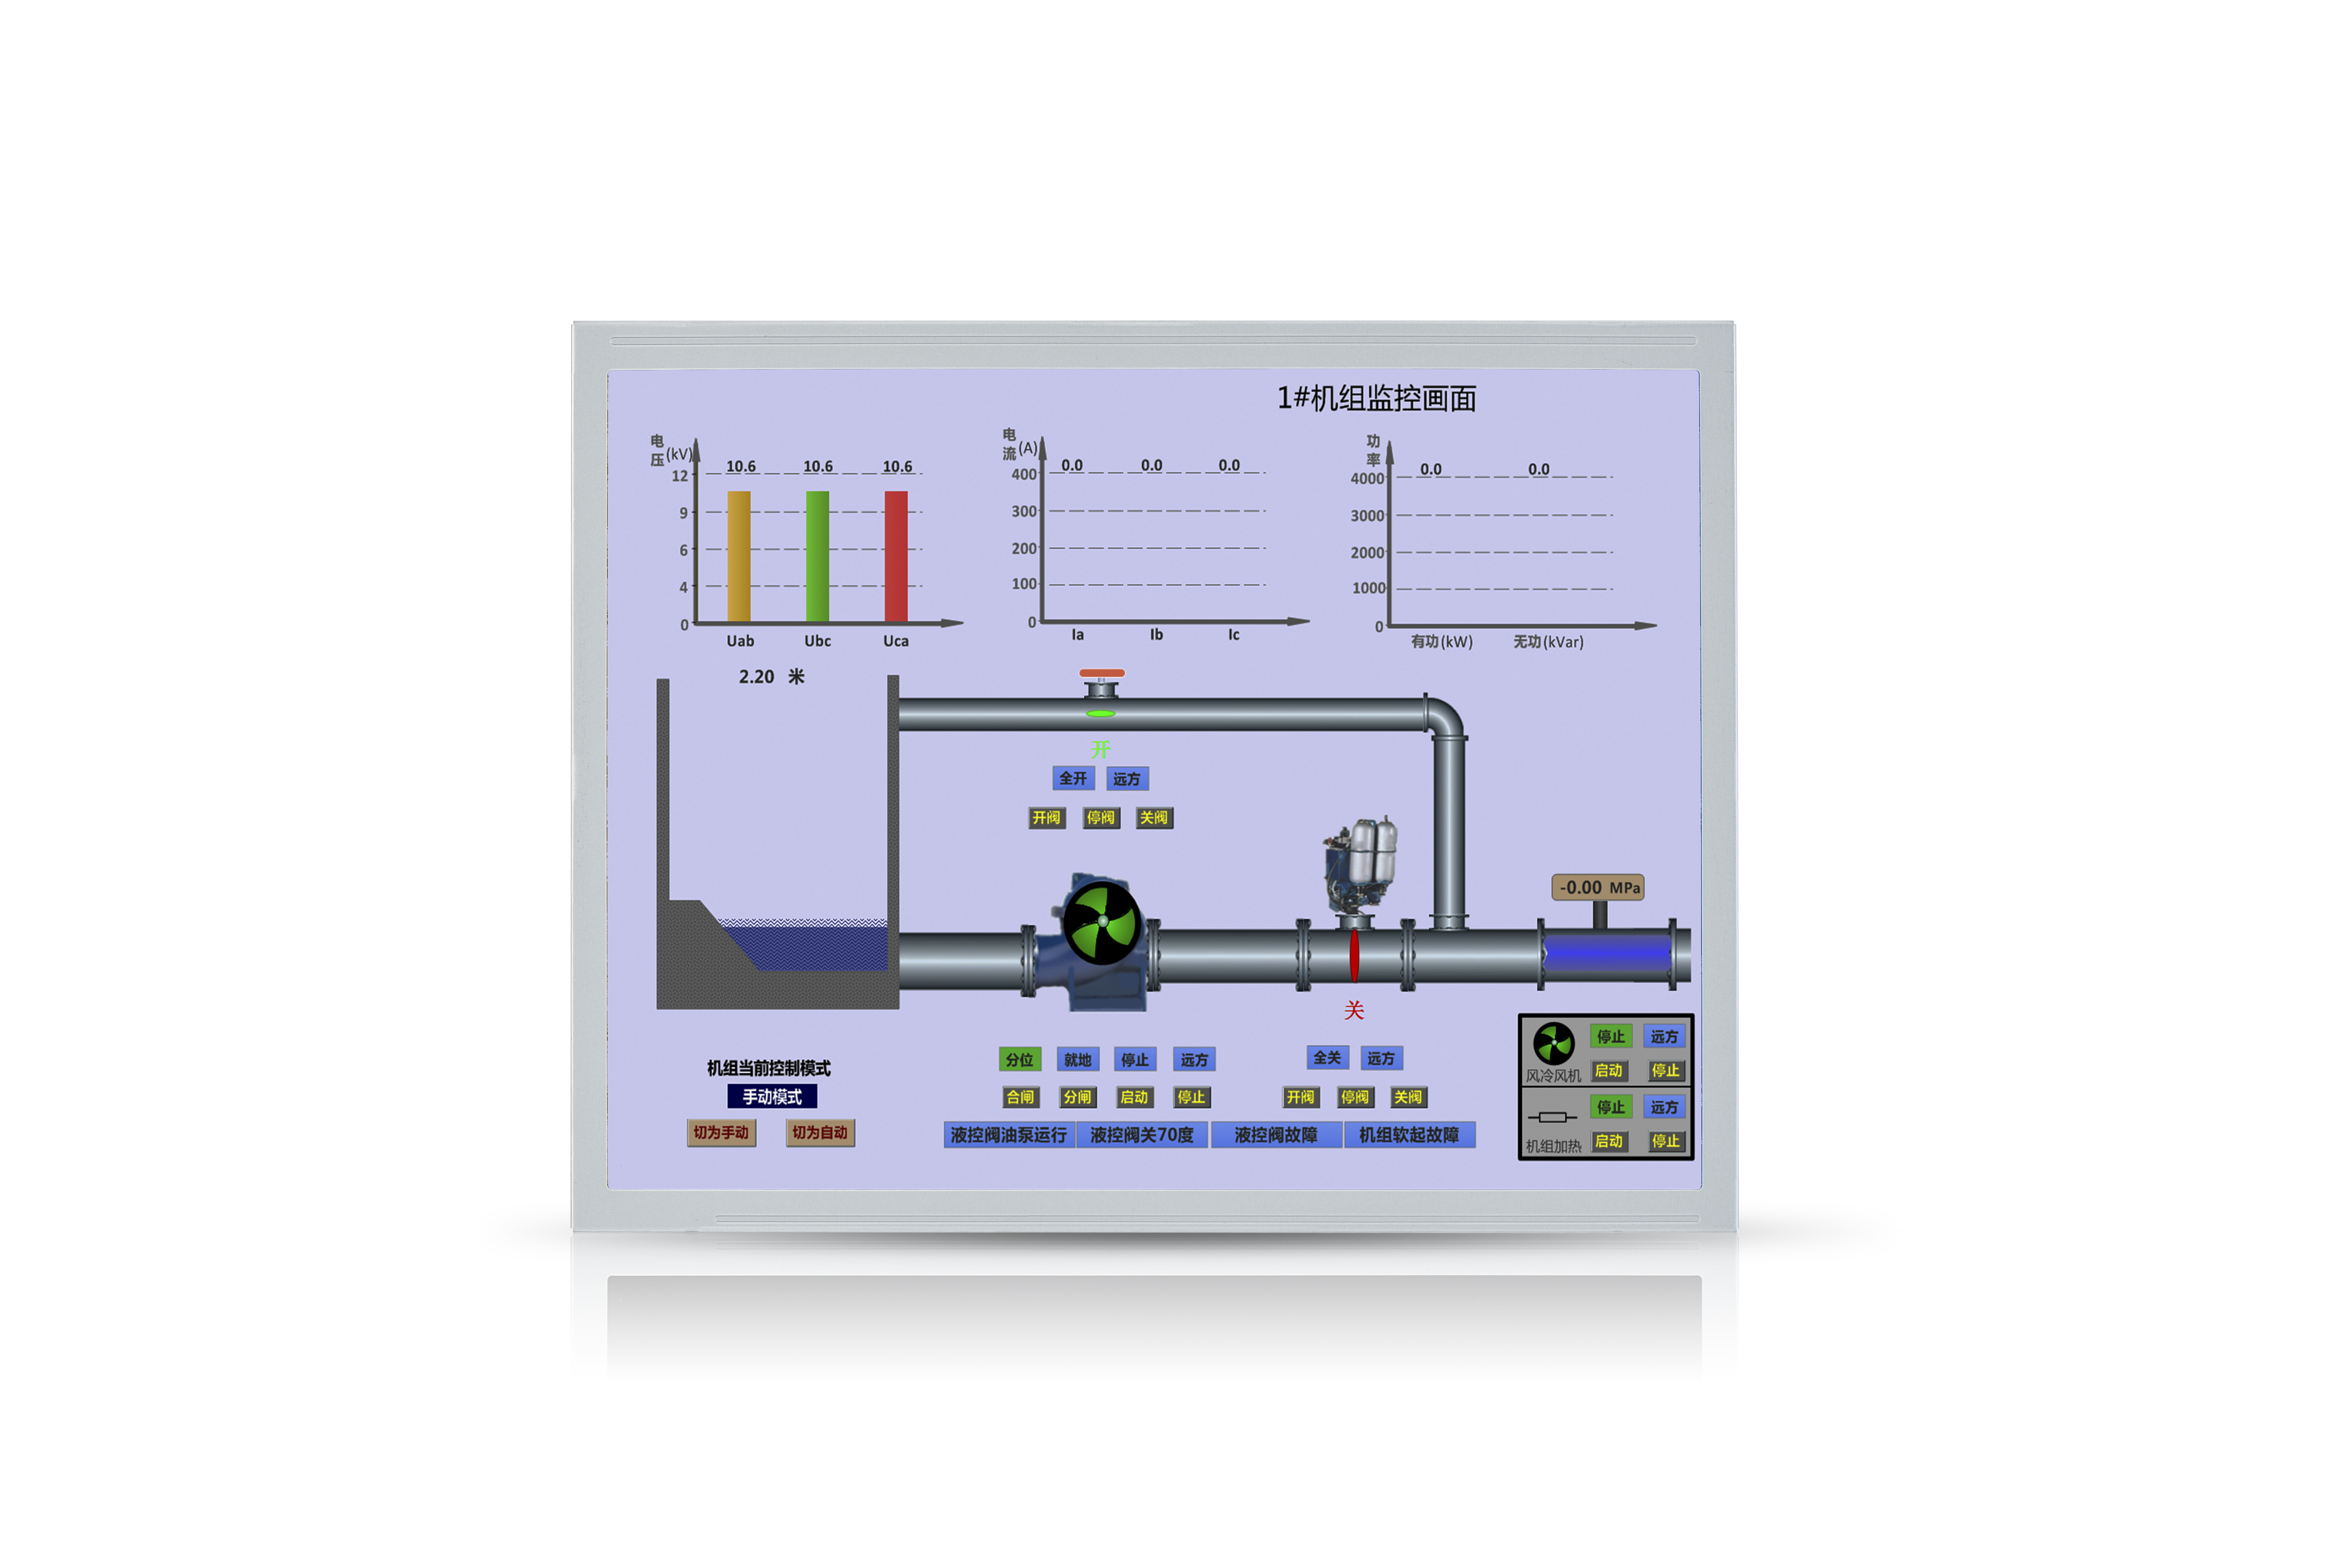 Streamlining Operations:LCD Panels for Process Control and Automation